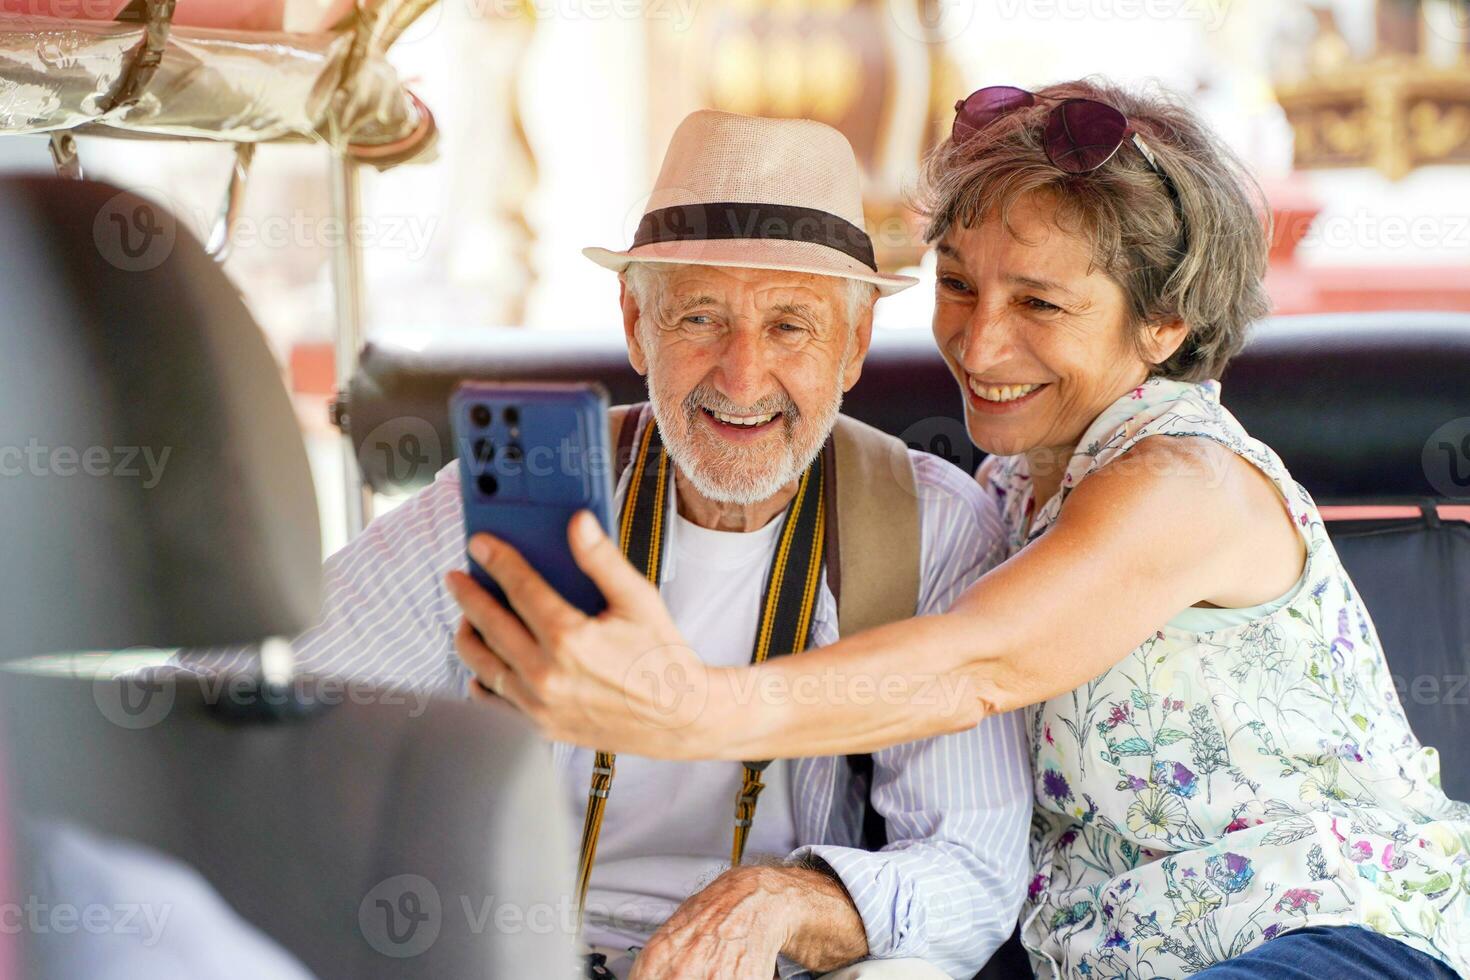 Closeup American senior tourist man with his friend European take a photo selfie in a Tuktuk Thailand taxi on blurred of city and sun bright background. Senior tourist concept